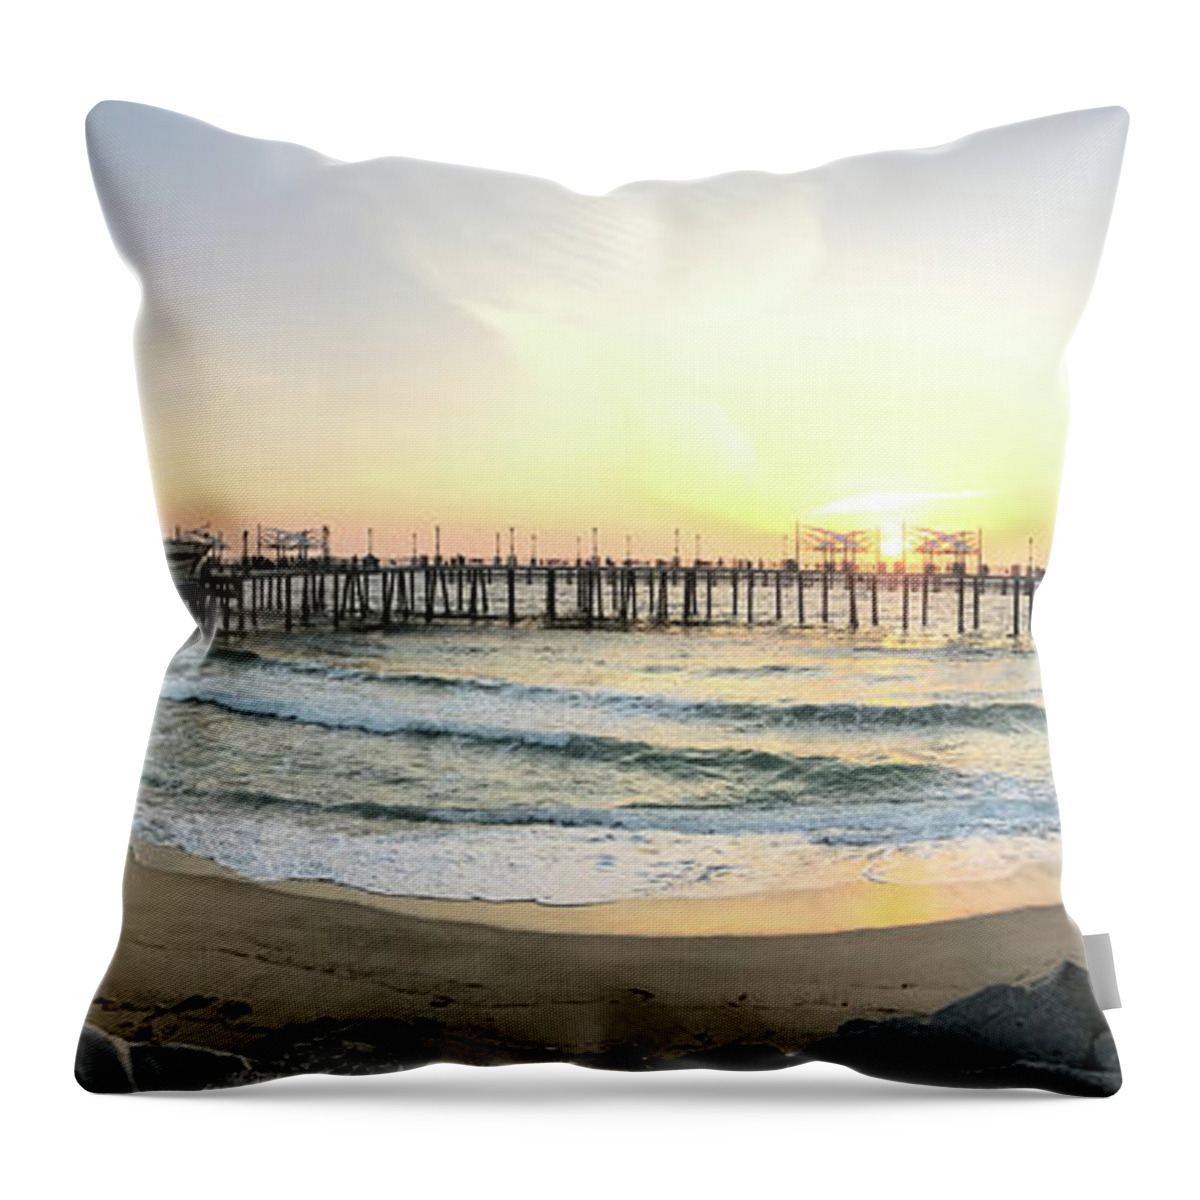 Florida Pier At Sunset Throw Pillow featuring the photograph Florida Pier by Stoneworks Imagery